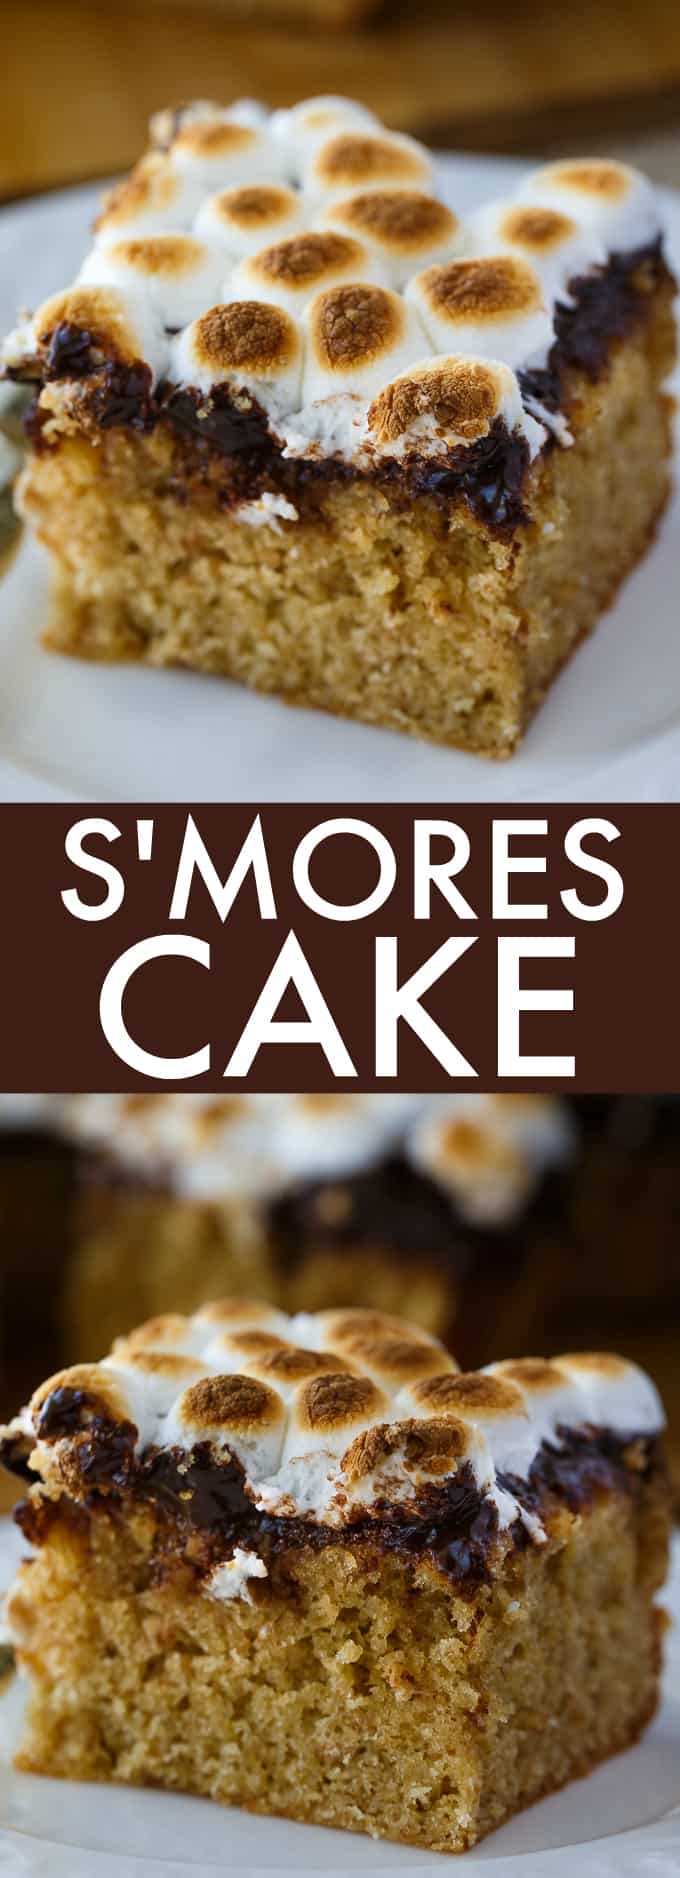 S'mores Cake - The epitome of summer! Bring the campfire indoors with this super simple, but decadent cake. It's incredibly moist, sweet with layers of graham cracker cake, rich chocolate and toasty marshmallows.